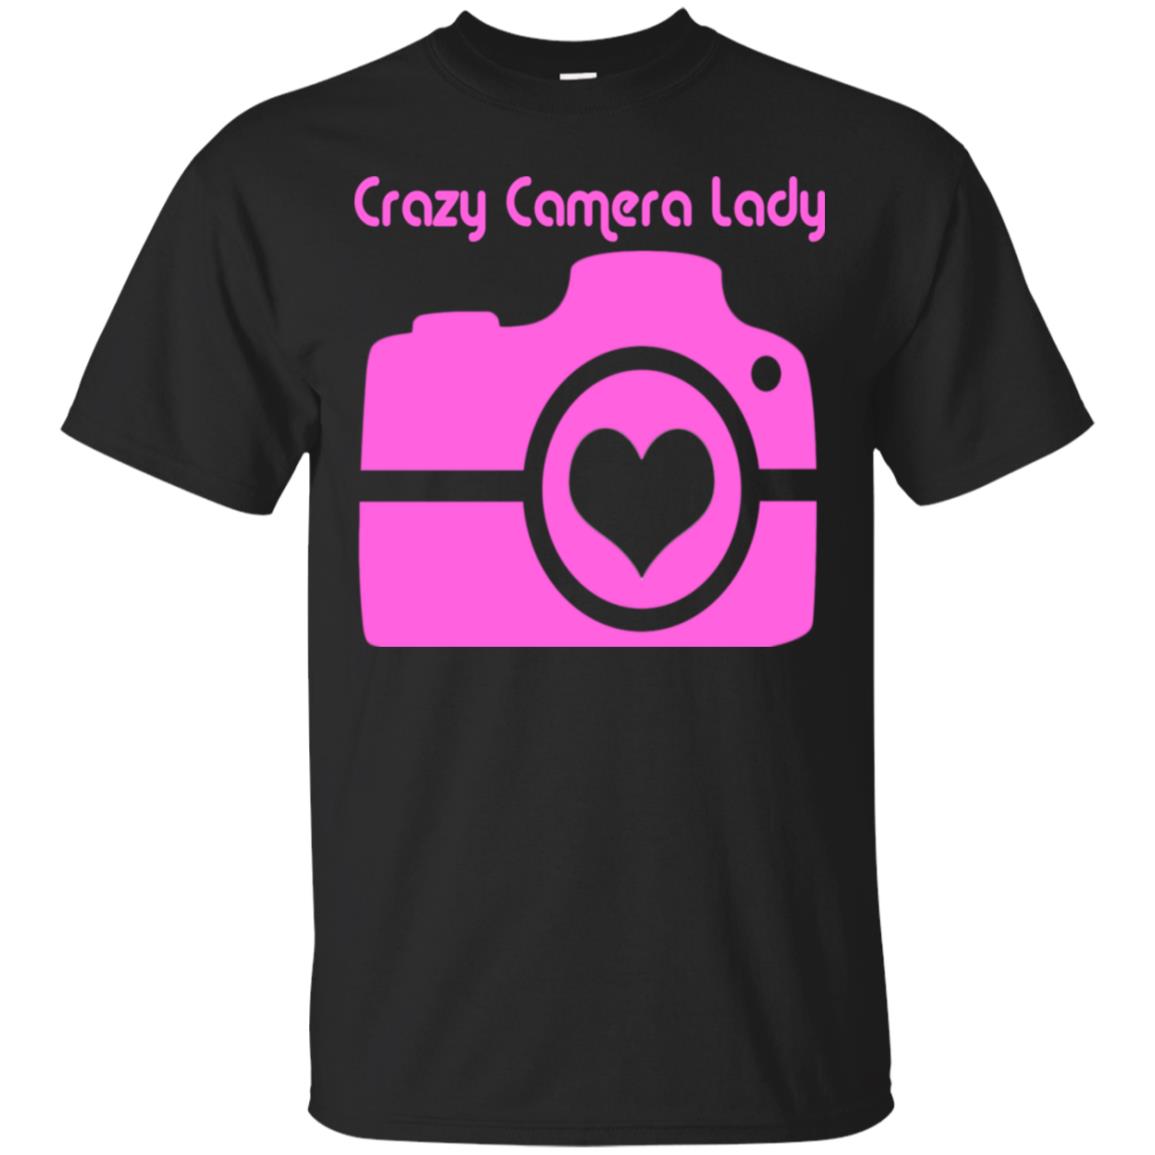 Crazy Camera Lady, Photography Tee For Photographer Shirts